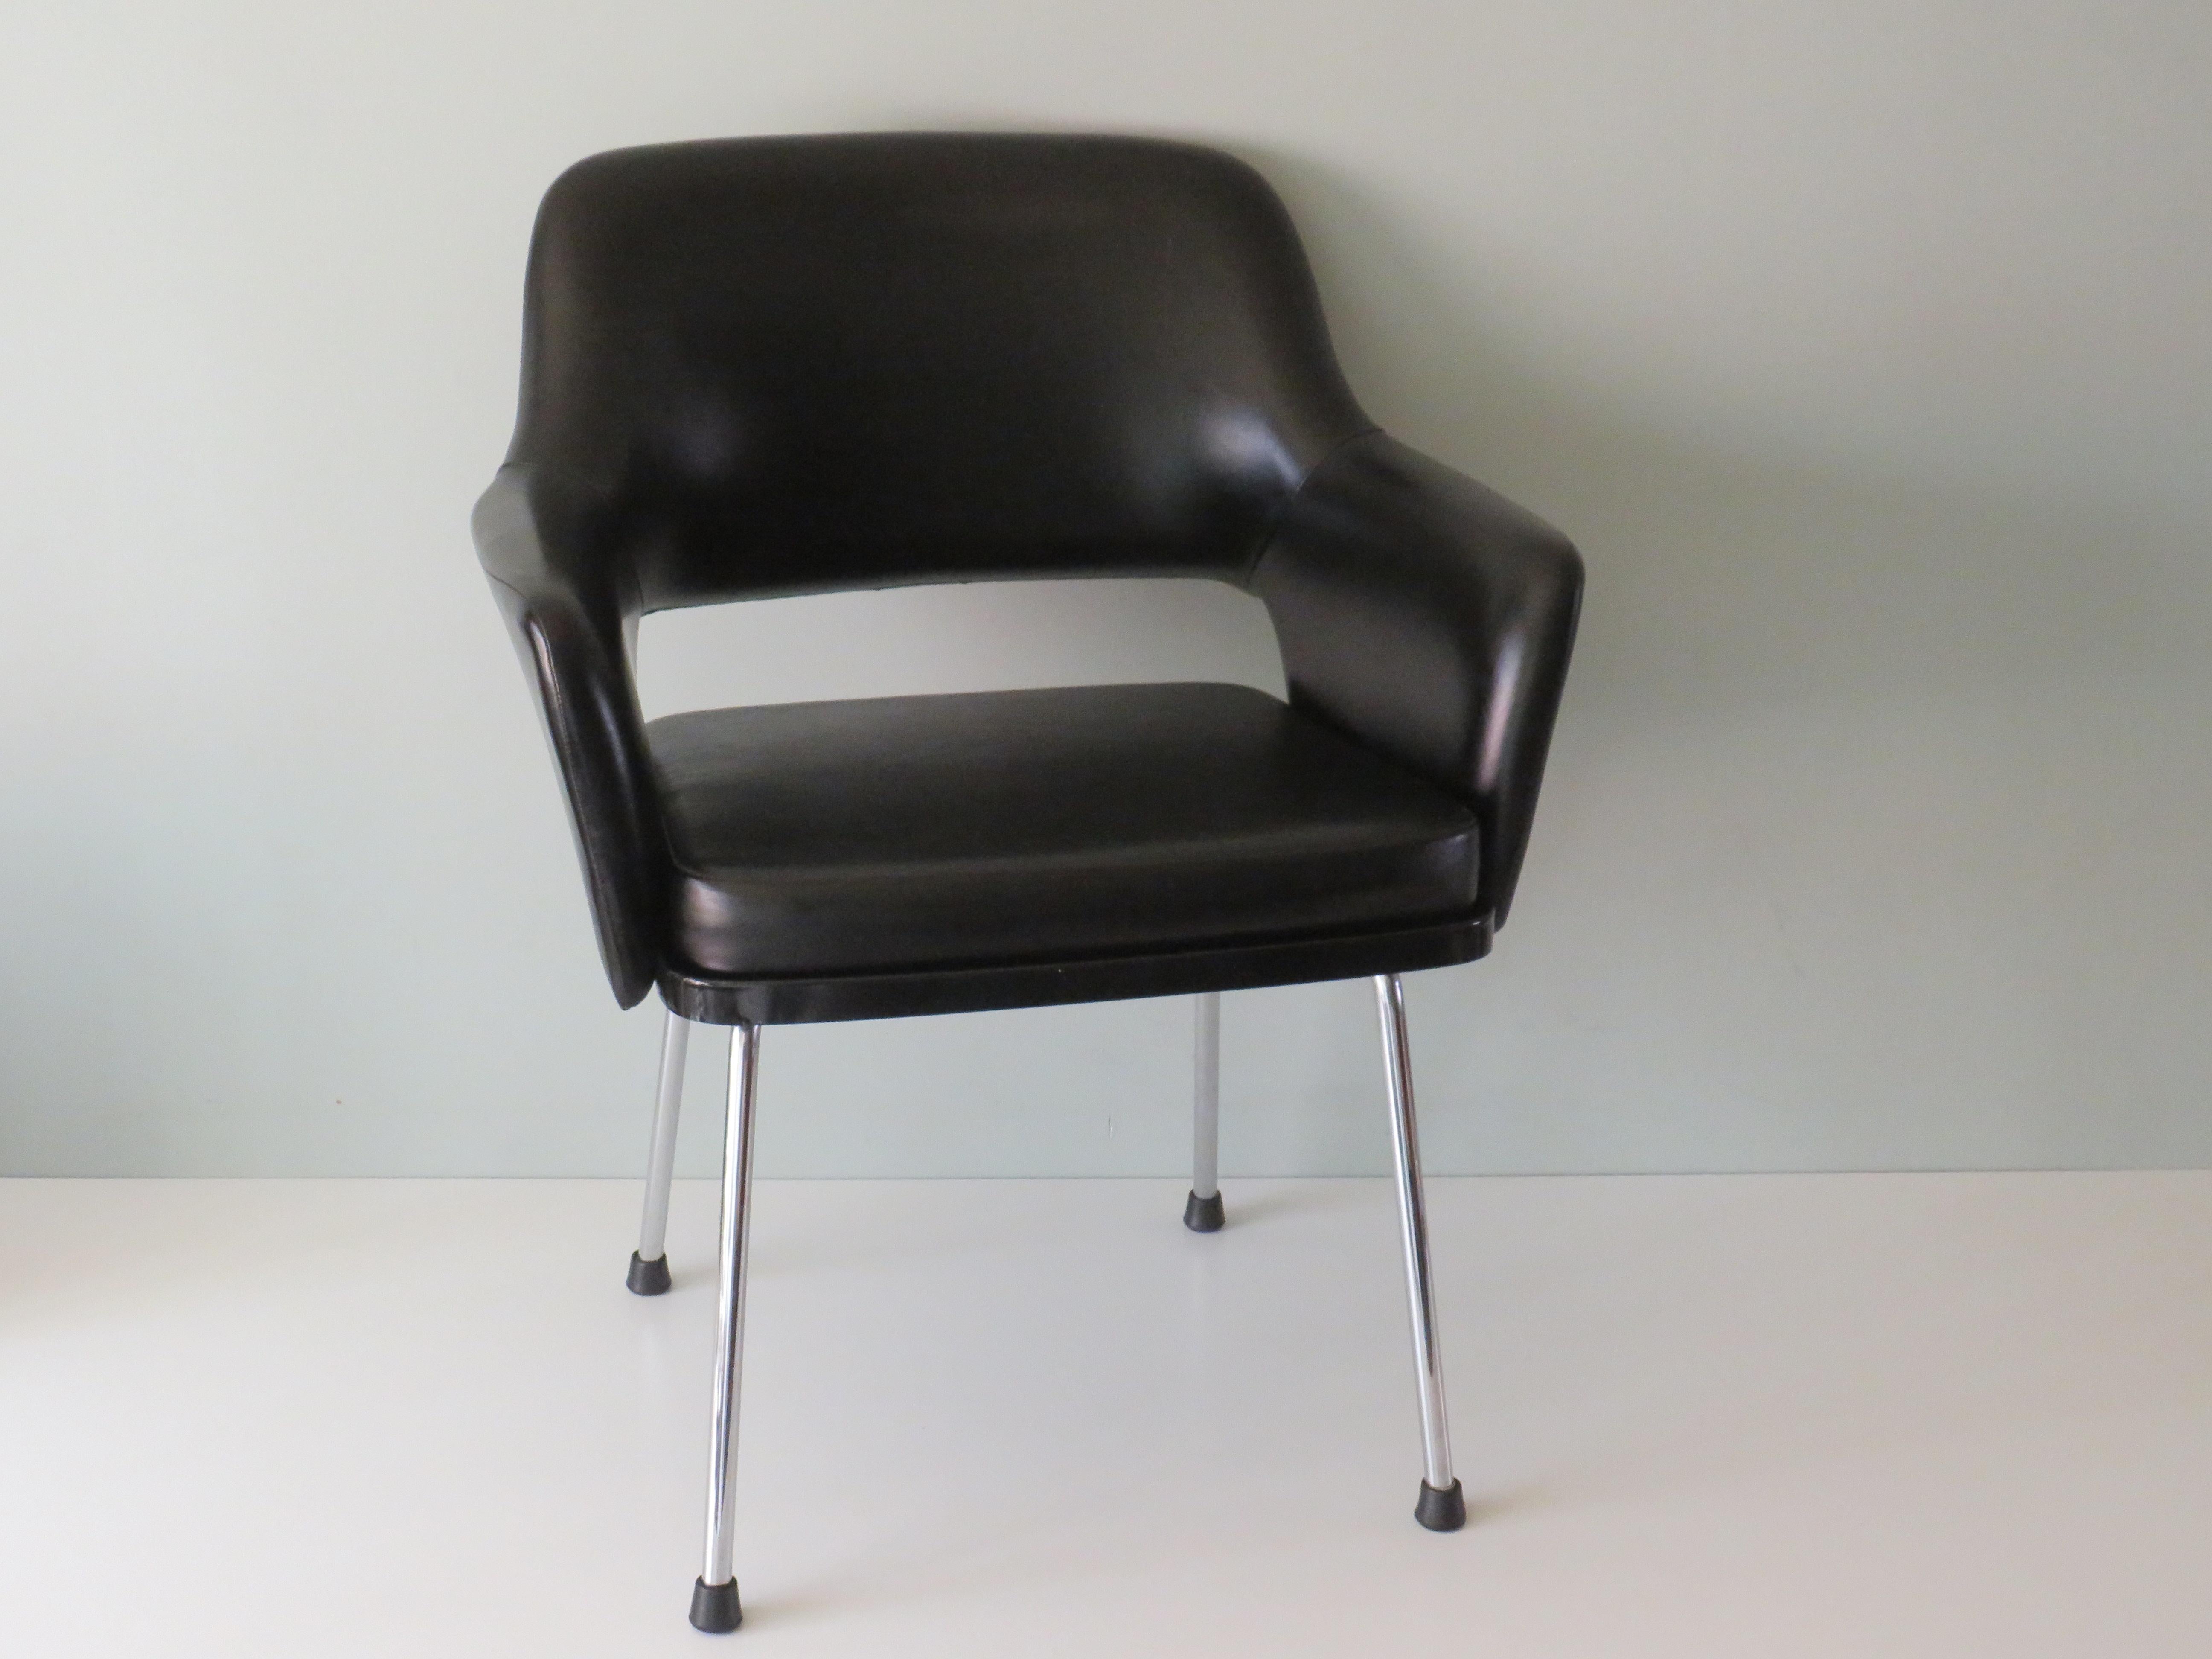 Elegant yet sturdy and comfortable armrest chair with chrome legs and black skai upholstery.
The seat height of the chair is 46 cm. The well-filled pillow lies in a black plastic tub.
The chair is, considering its age, in very good condition.